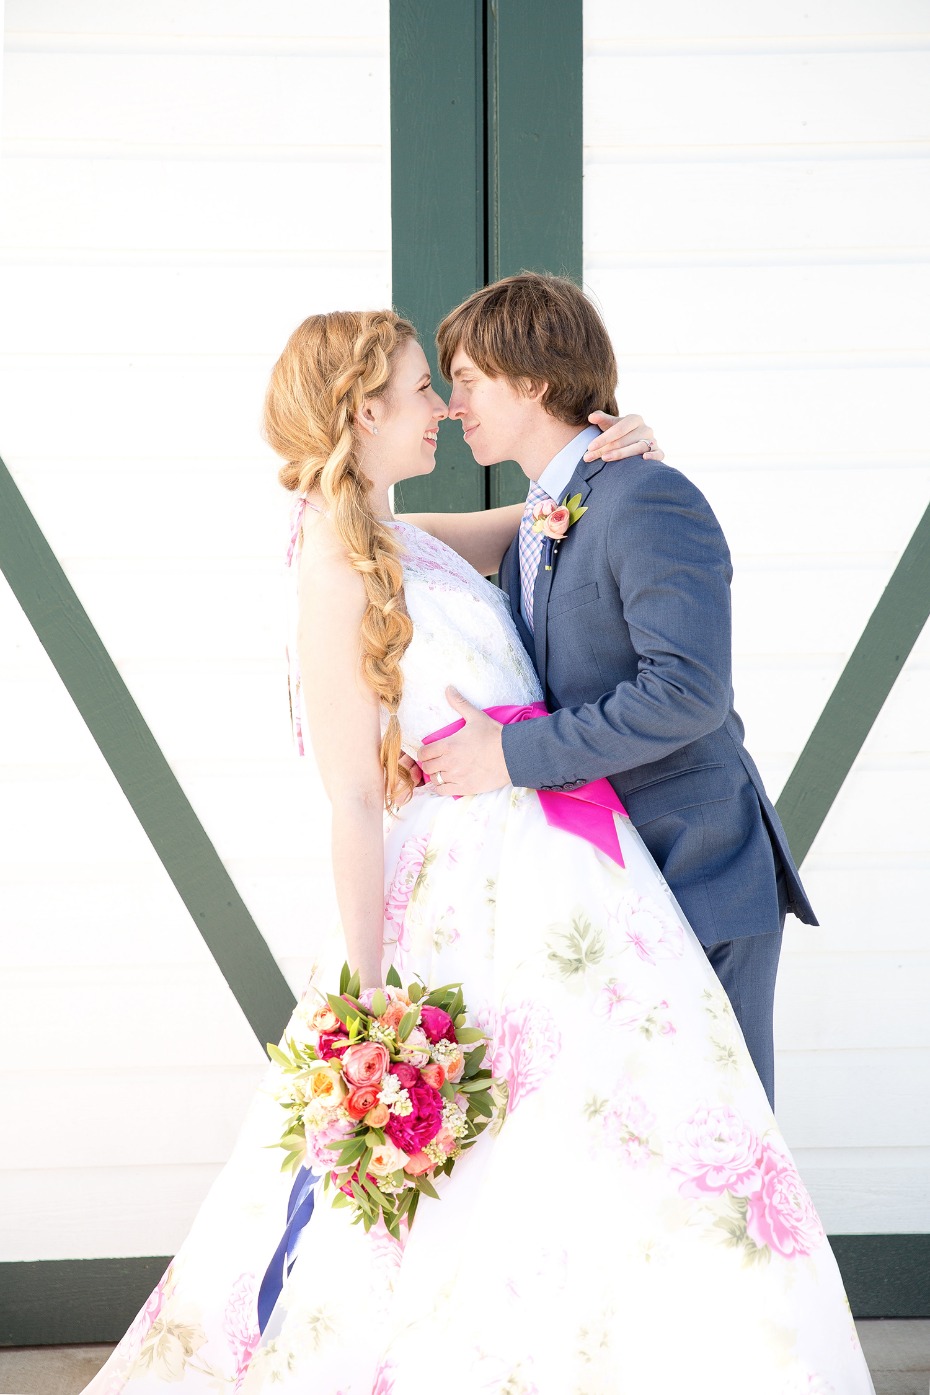 How cute are they? Don't miss this colorful preppy wedding